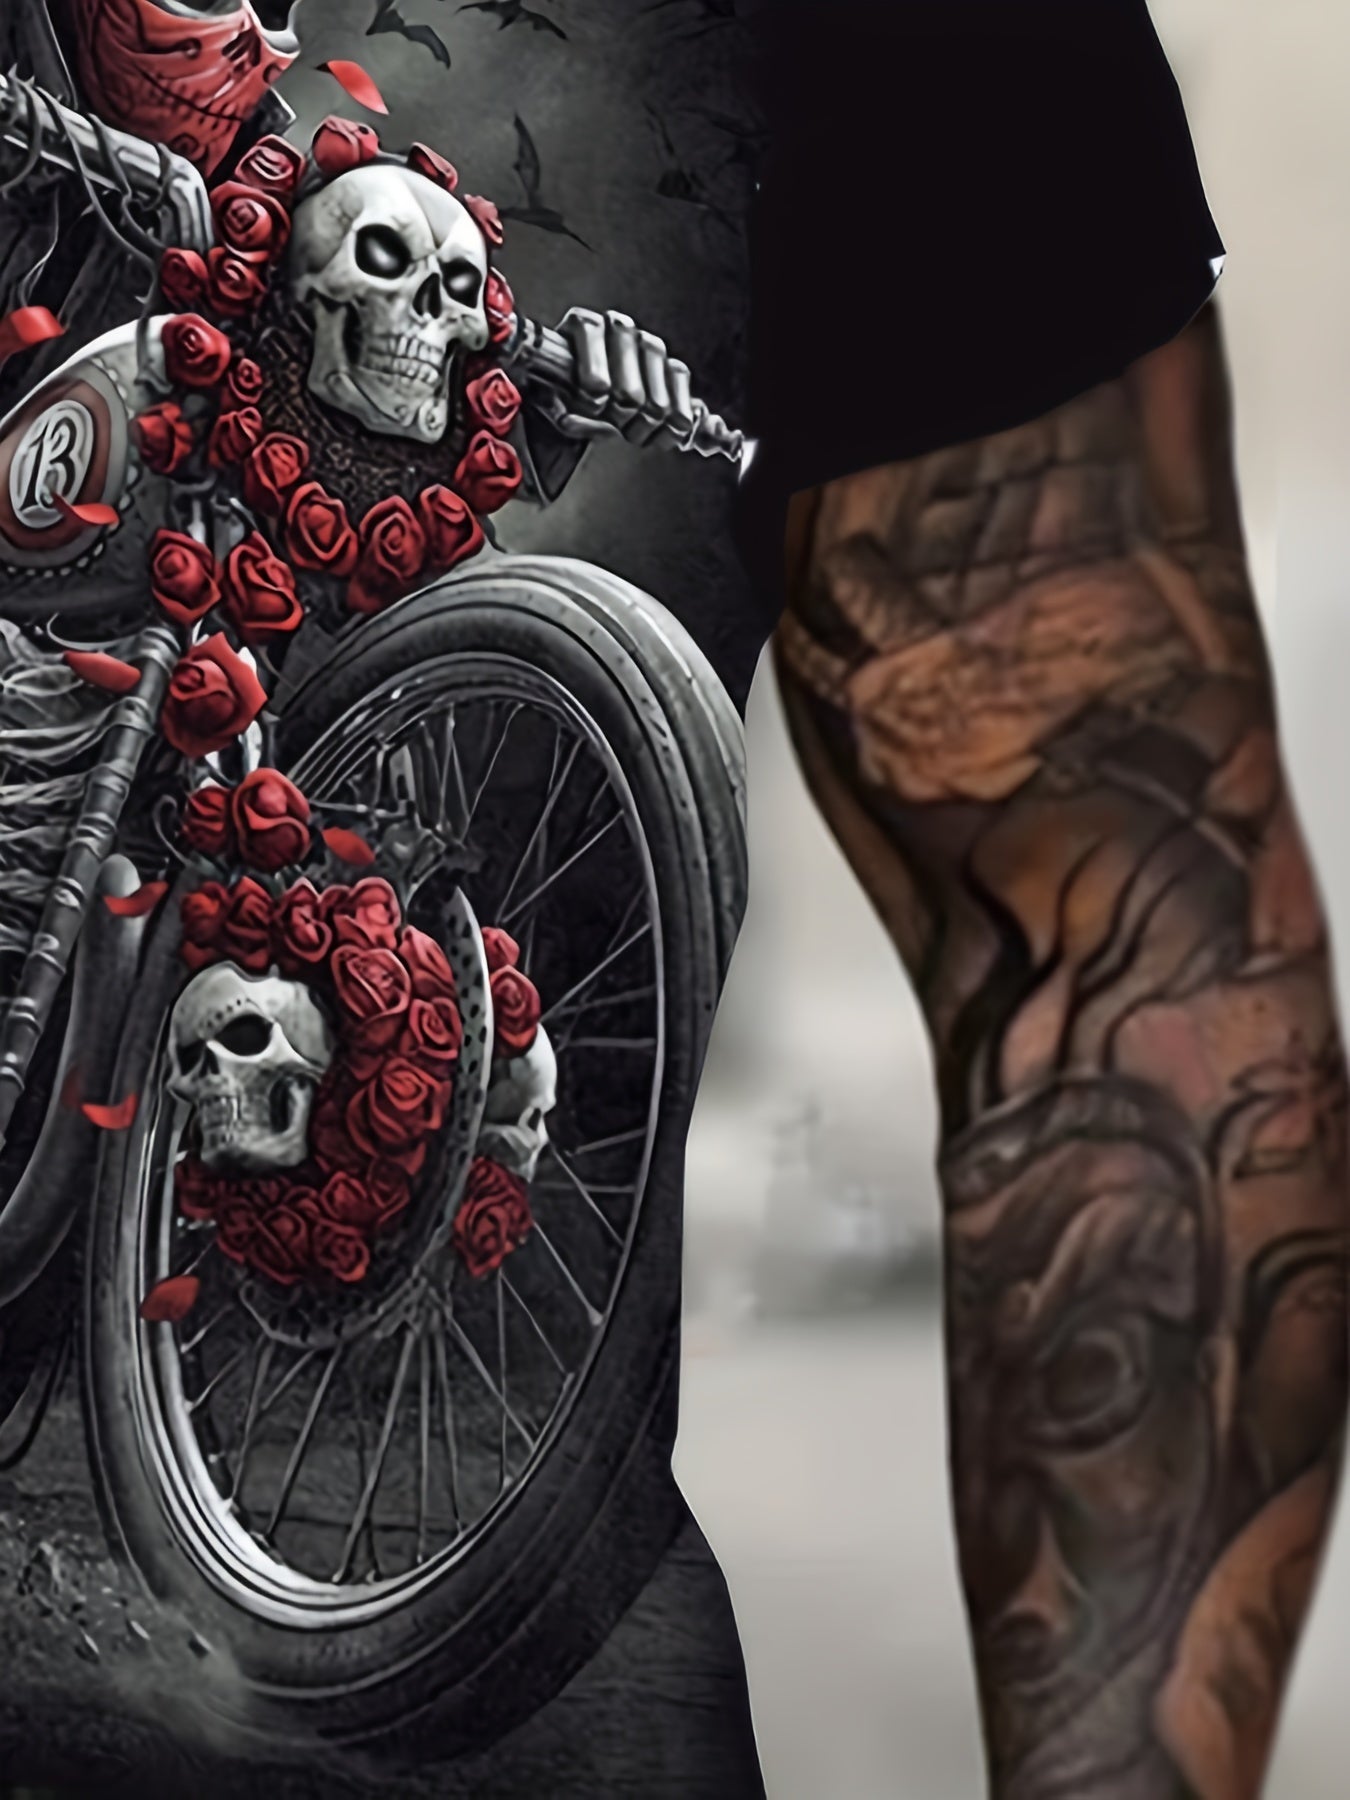 Skeleton Motorcyclist With Beauty 3D Digital Pattern Print Graphic T-shirts, Causal Tees, Short Sleeves Comfortable Pullover Tops, Men's Summer Clothing